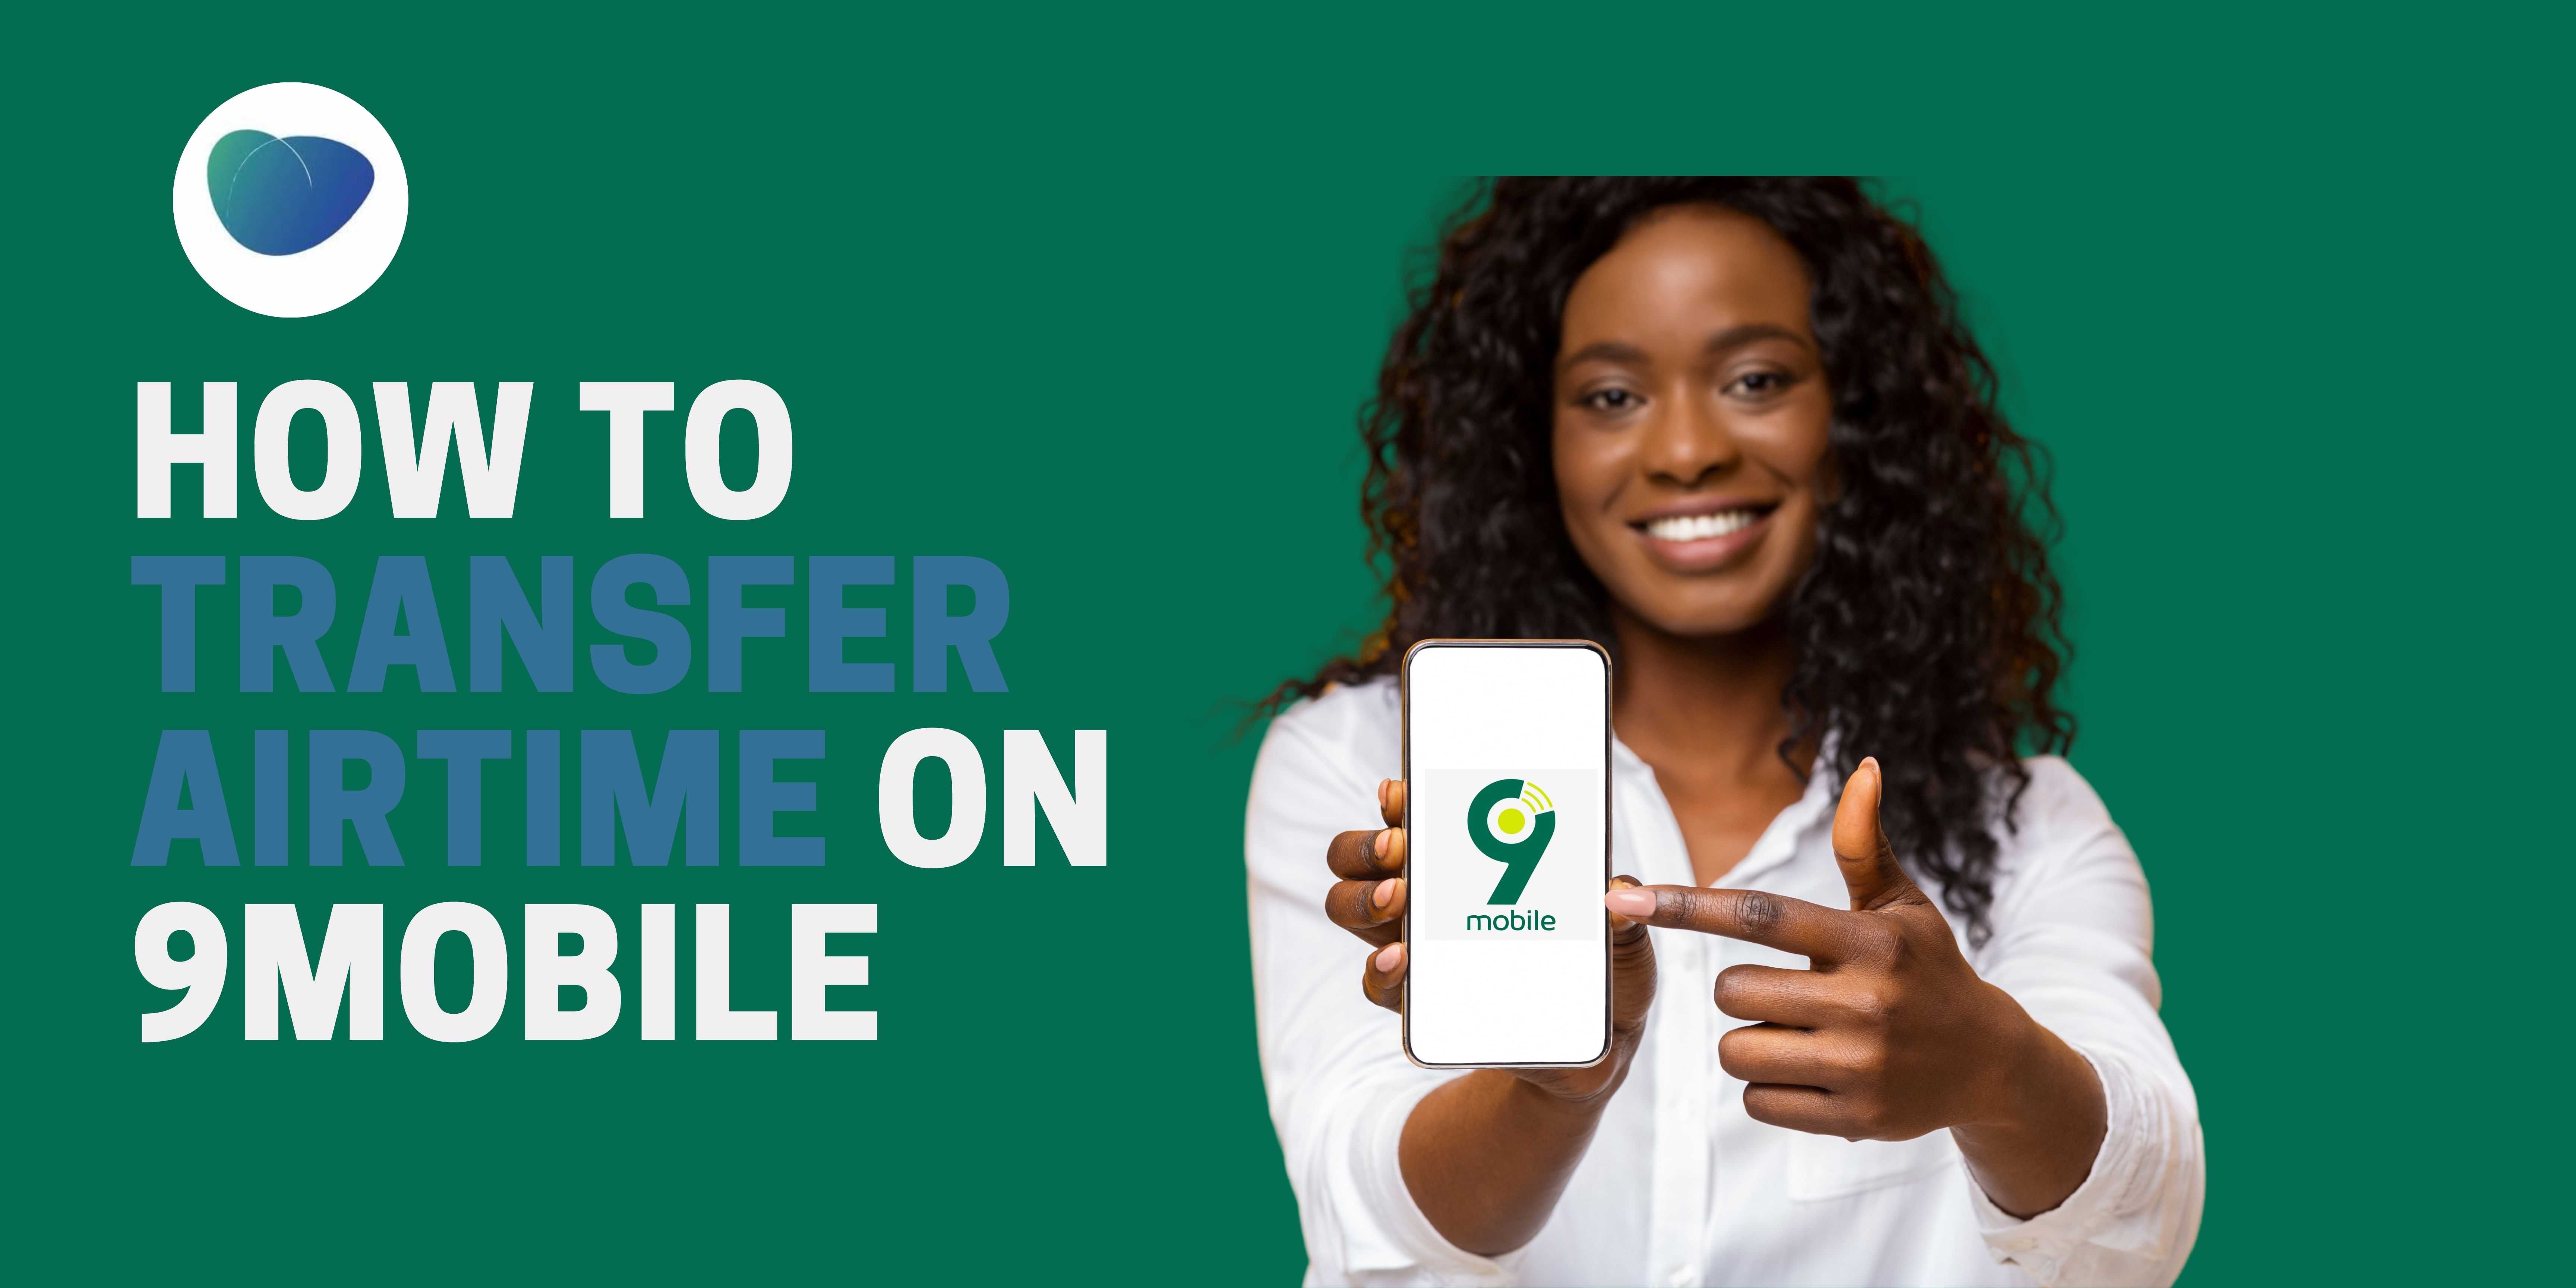 How To Transfer Airtime On 9mobile [Updated 2021] | LoanSpot